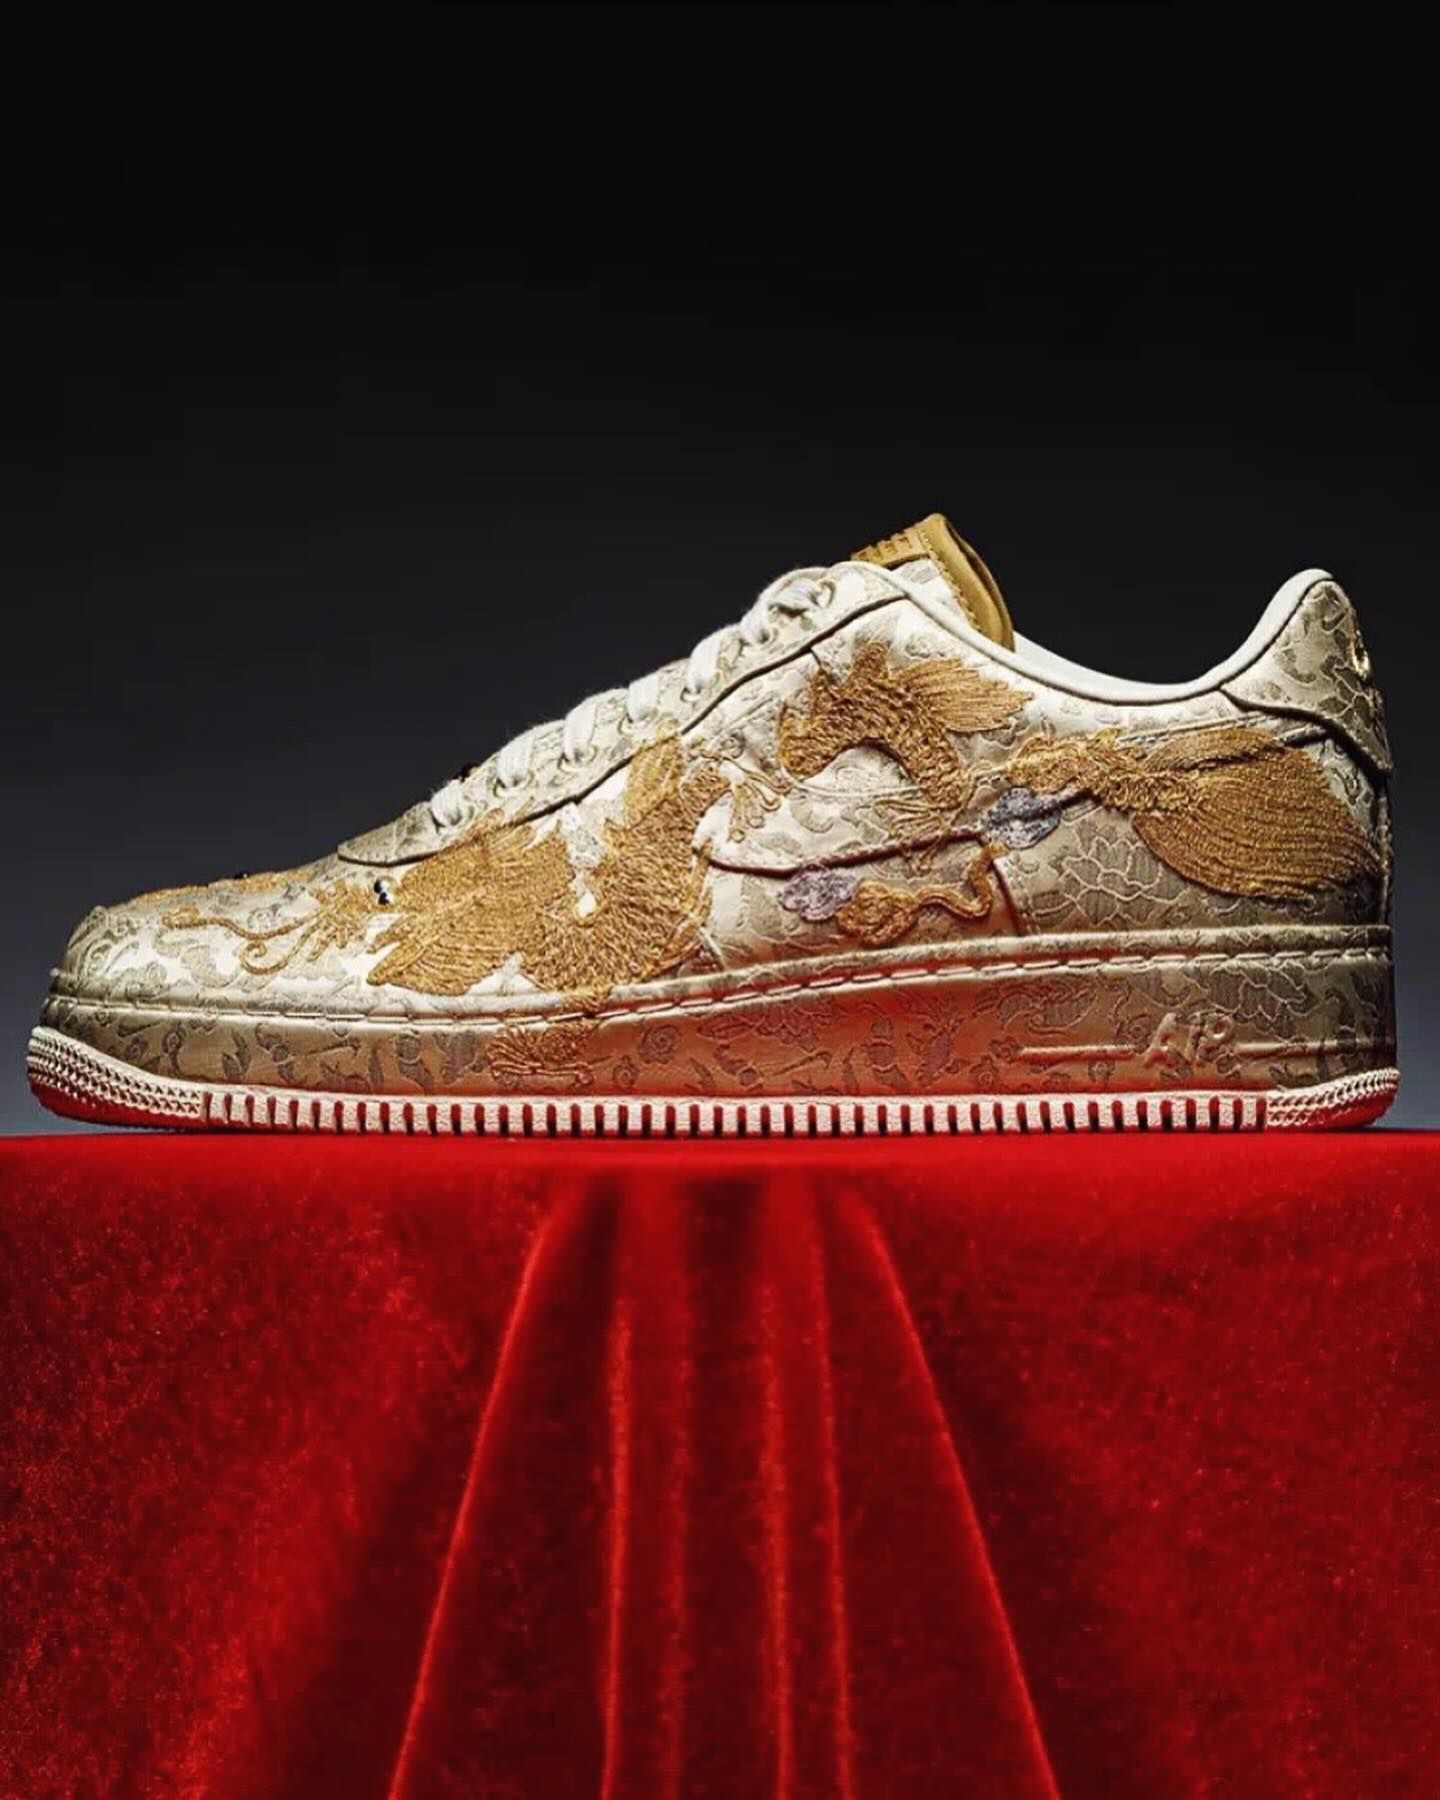 Nike Air Force 1 Low CNY “Year of the Dragon”